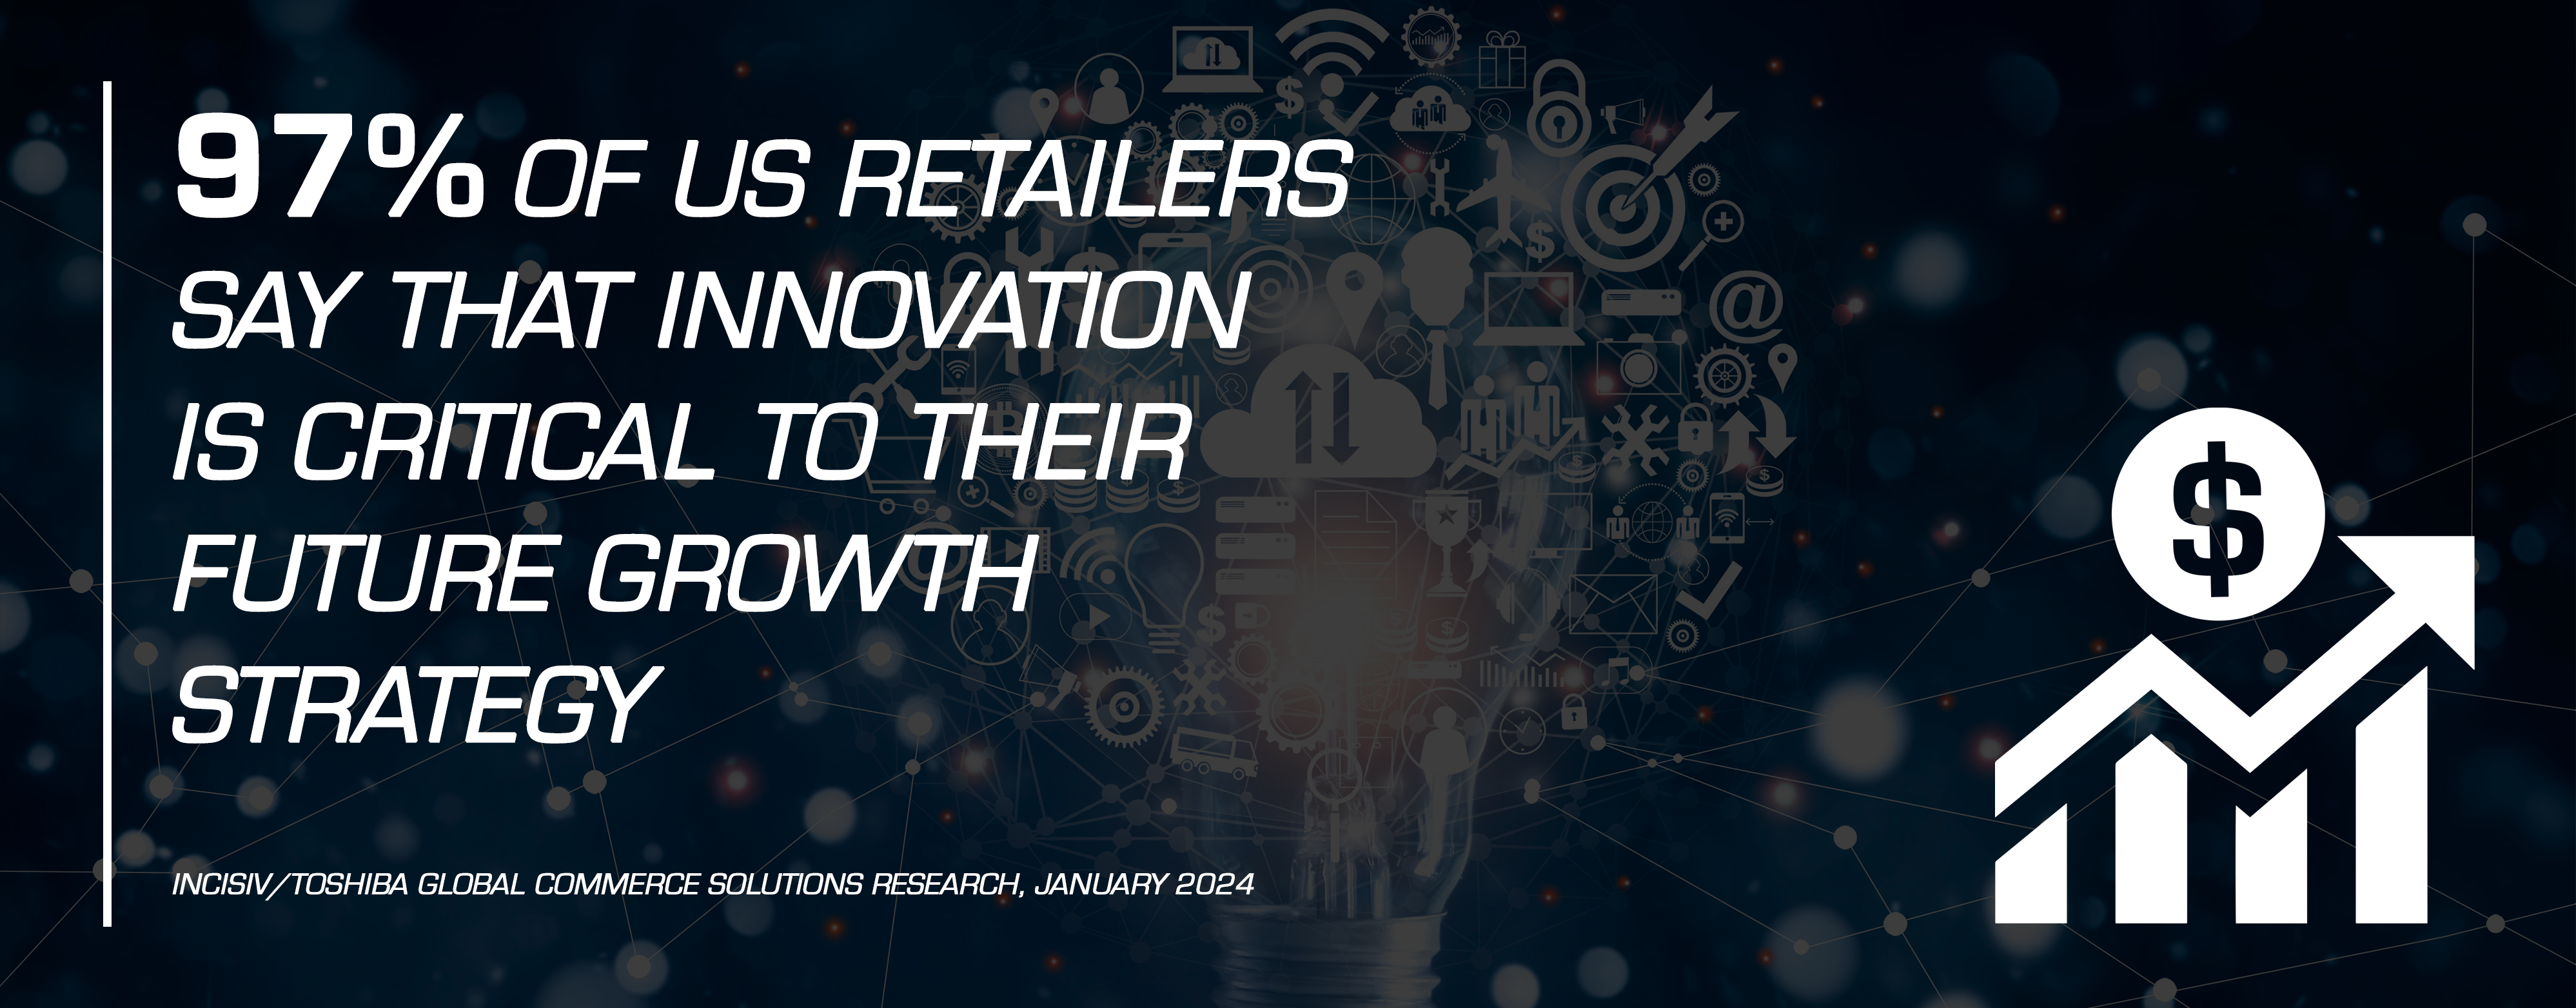 97% of retailers recognize innovation is critical